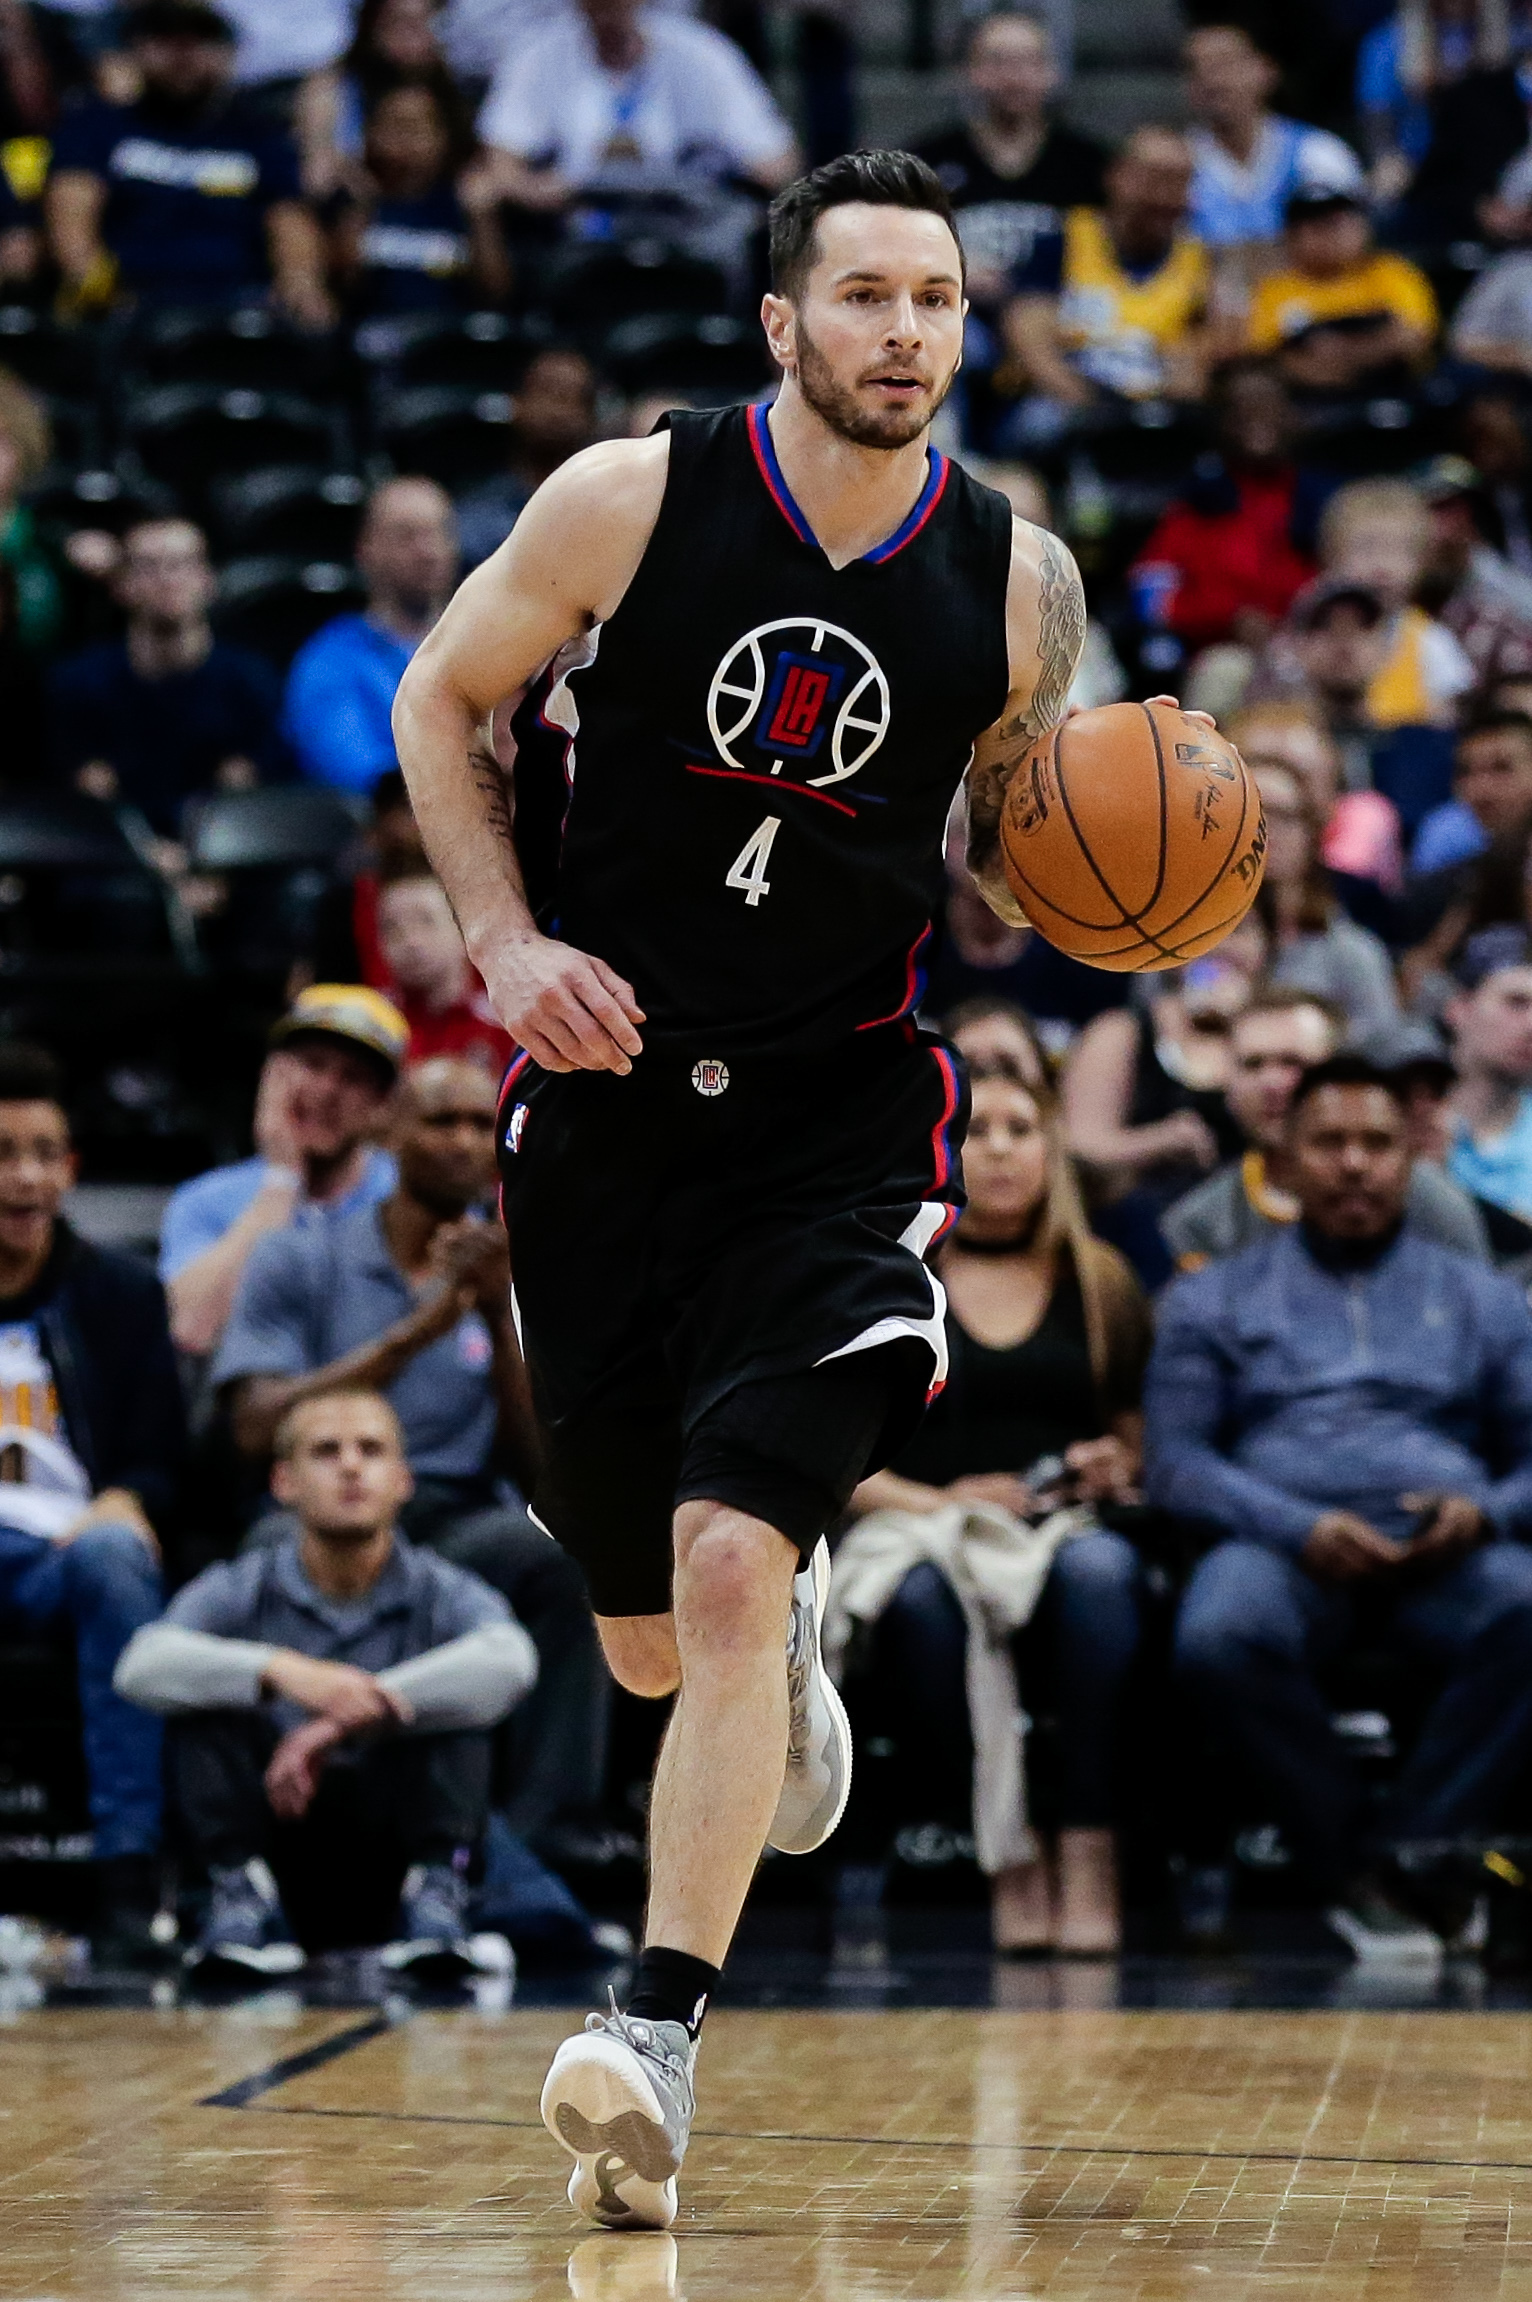 SIXERS SHARPSHOOTER JJ REDICK ALMOST SIGNED WITH INDY!